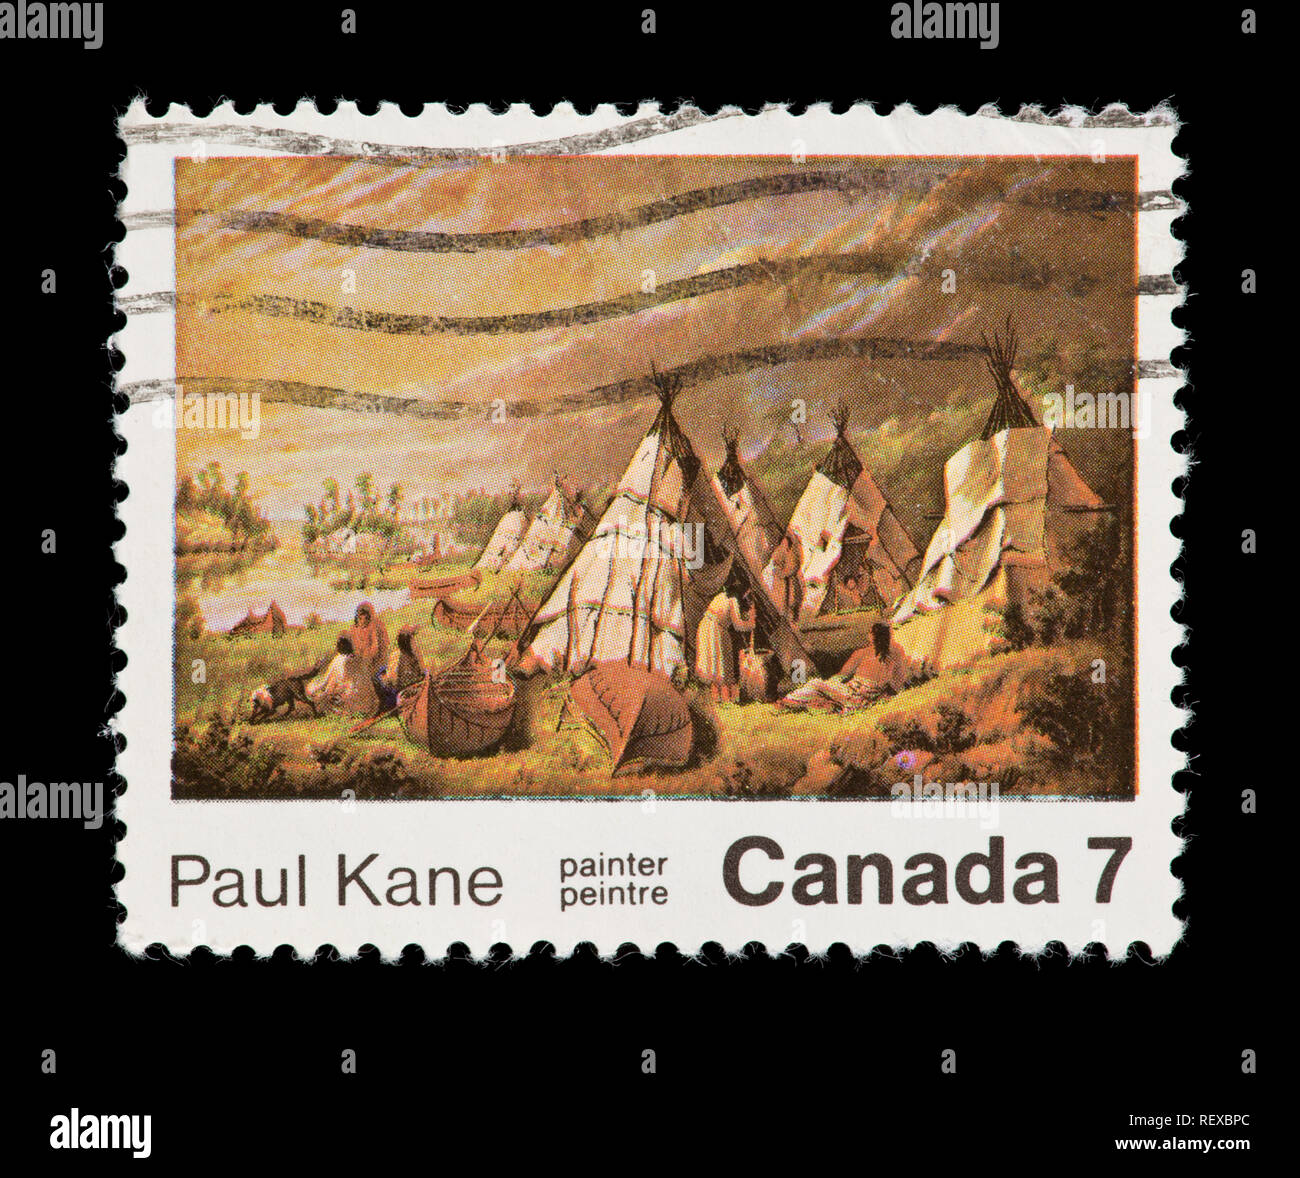 Postage stamp from Canada depicting the Paul Kane painting Indian Encampment on Lake Huron. Stock Photo